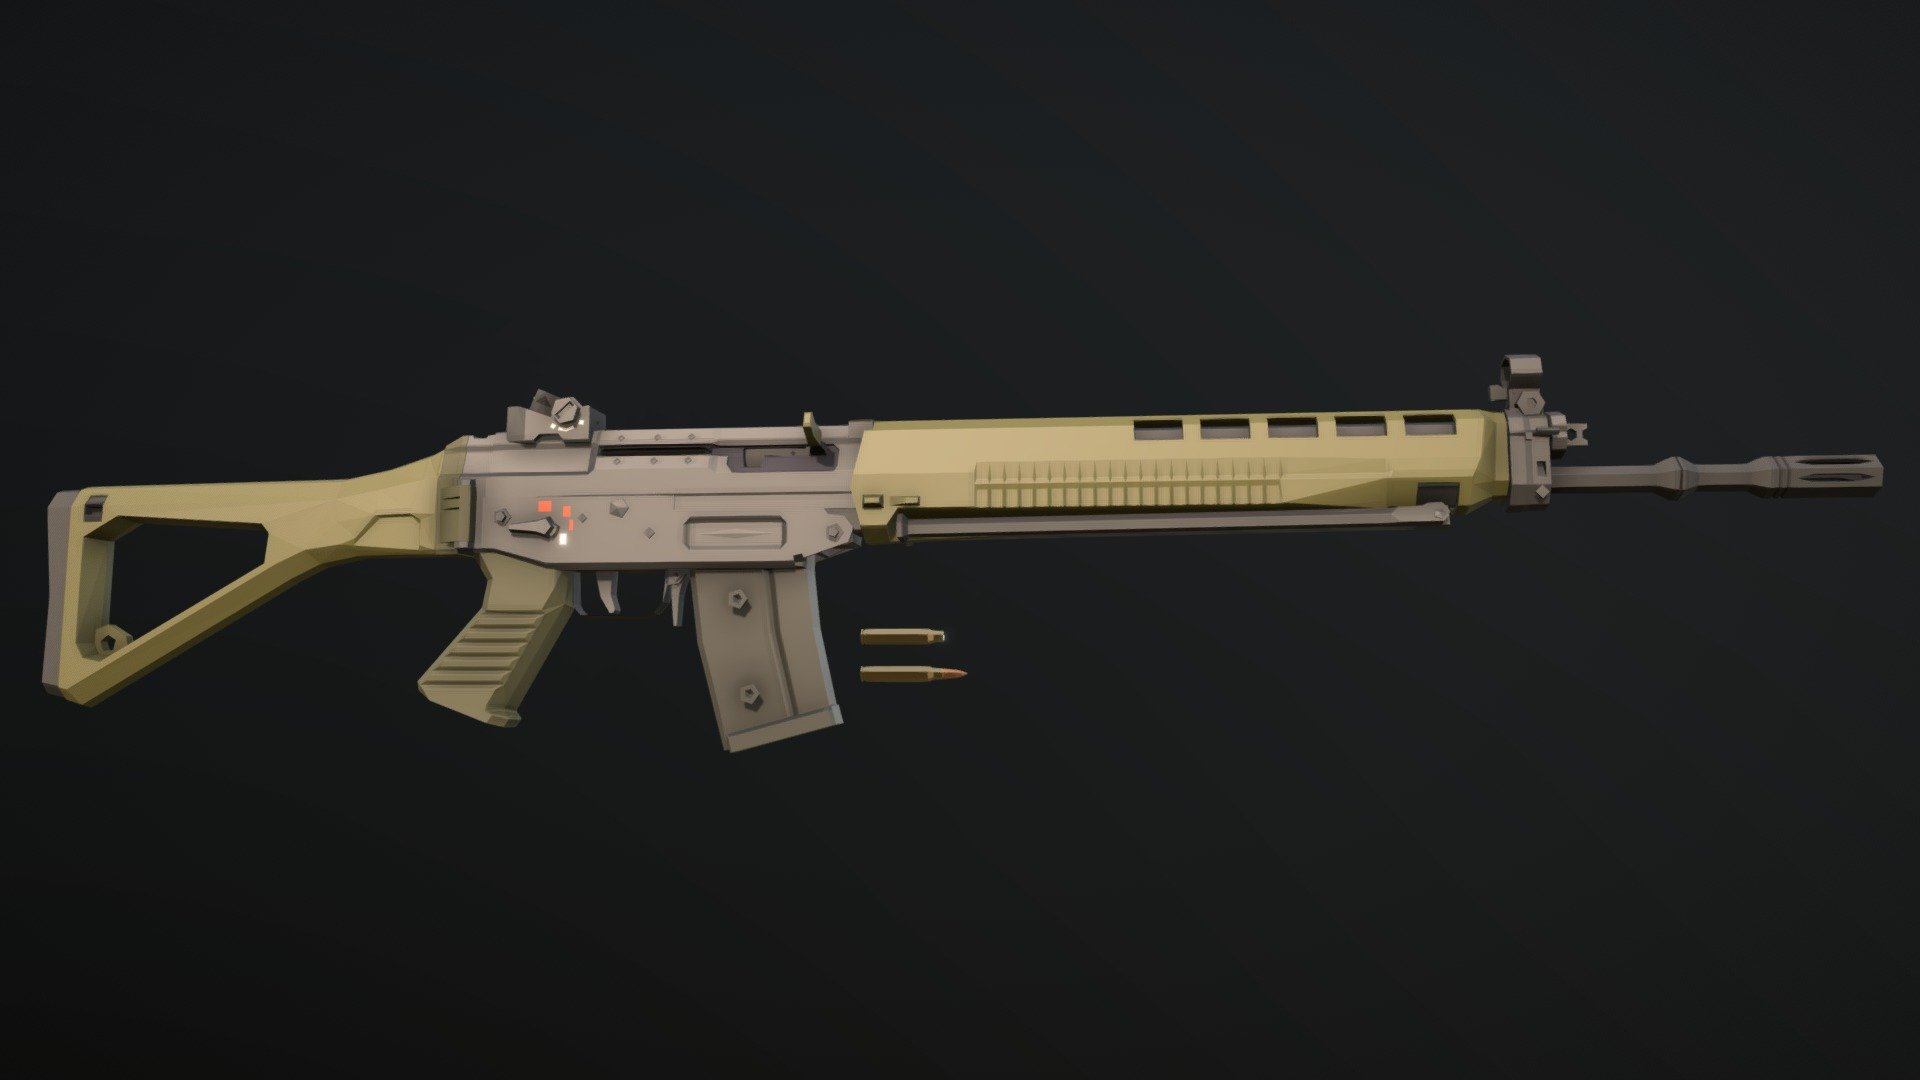 Low-Poly model of the SiG SG-550, adopted in the Swiss military as the Stgw. 90. This rifle is mechanically almost identical to the AK, however it fires 5.56x45mm, just like the M16, which, in combination with a well adjusted gas system, makes it have relatively low recoil, yet very reliable 3d model